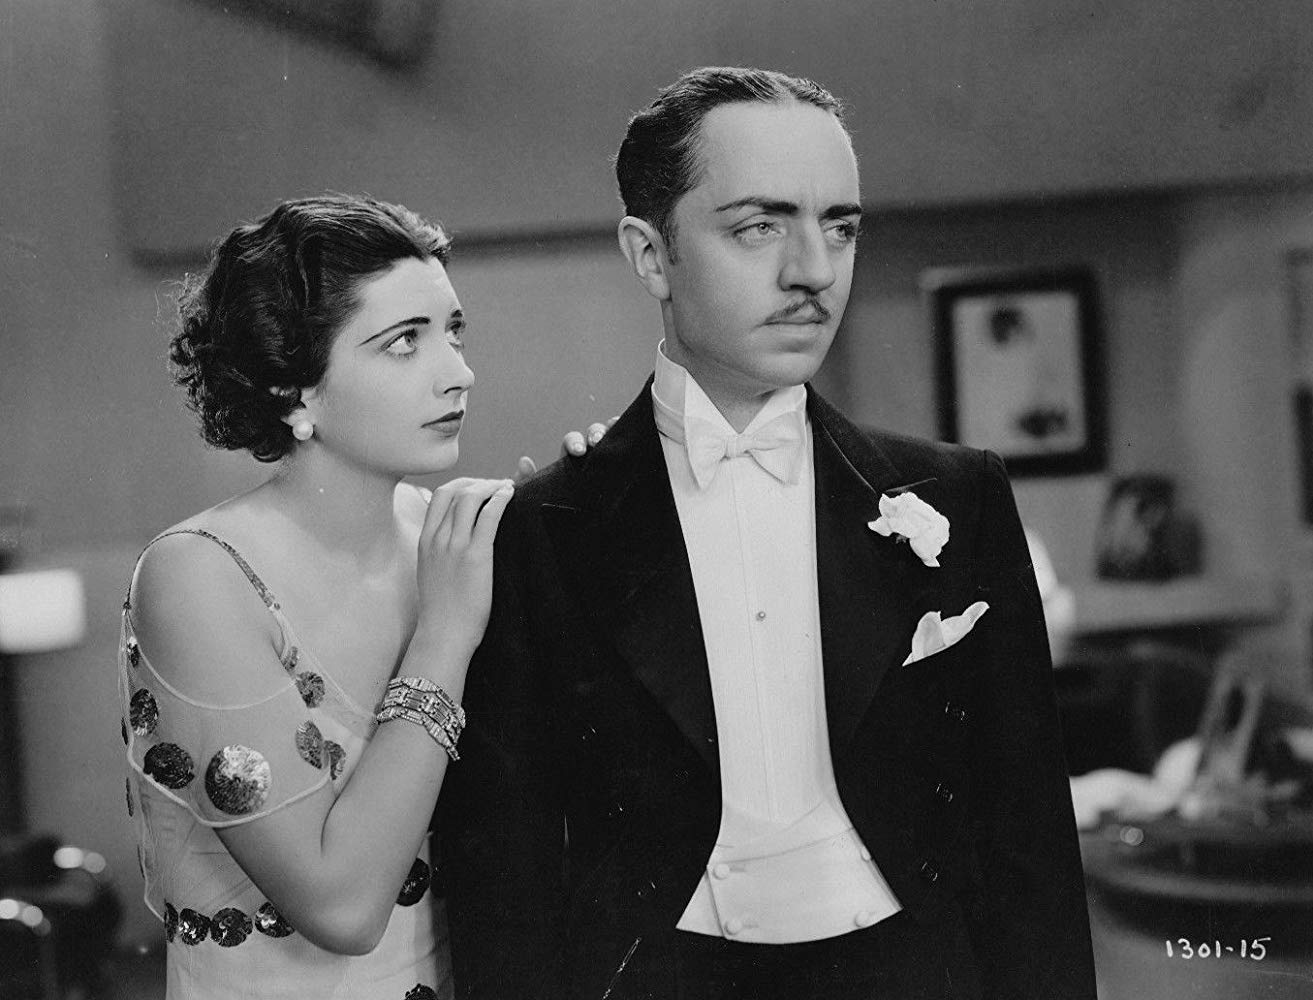 Kay Francis and William Powell in Ladies' man, 1931